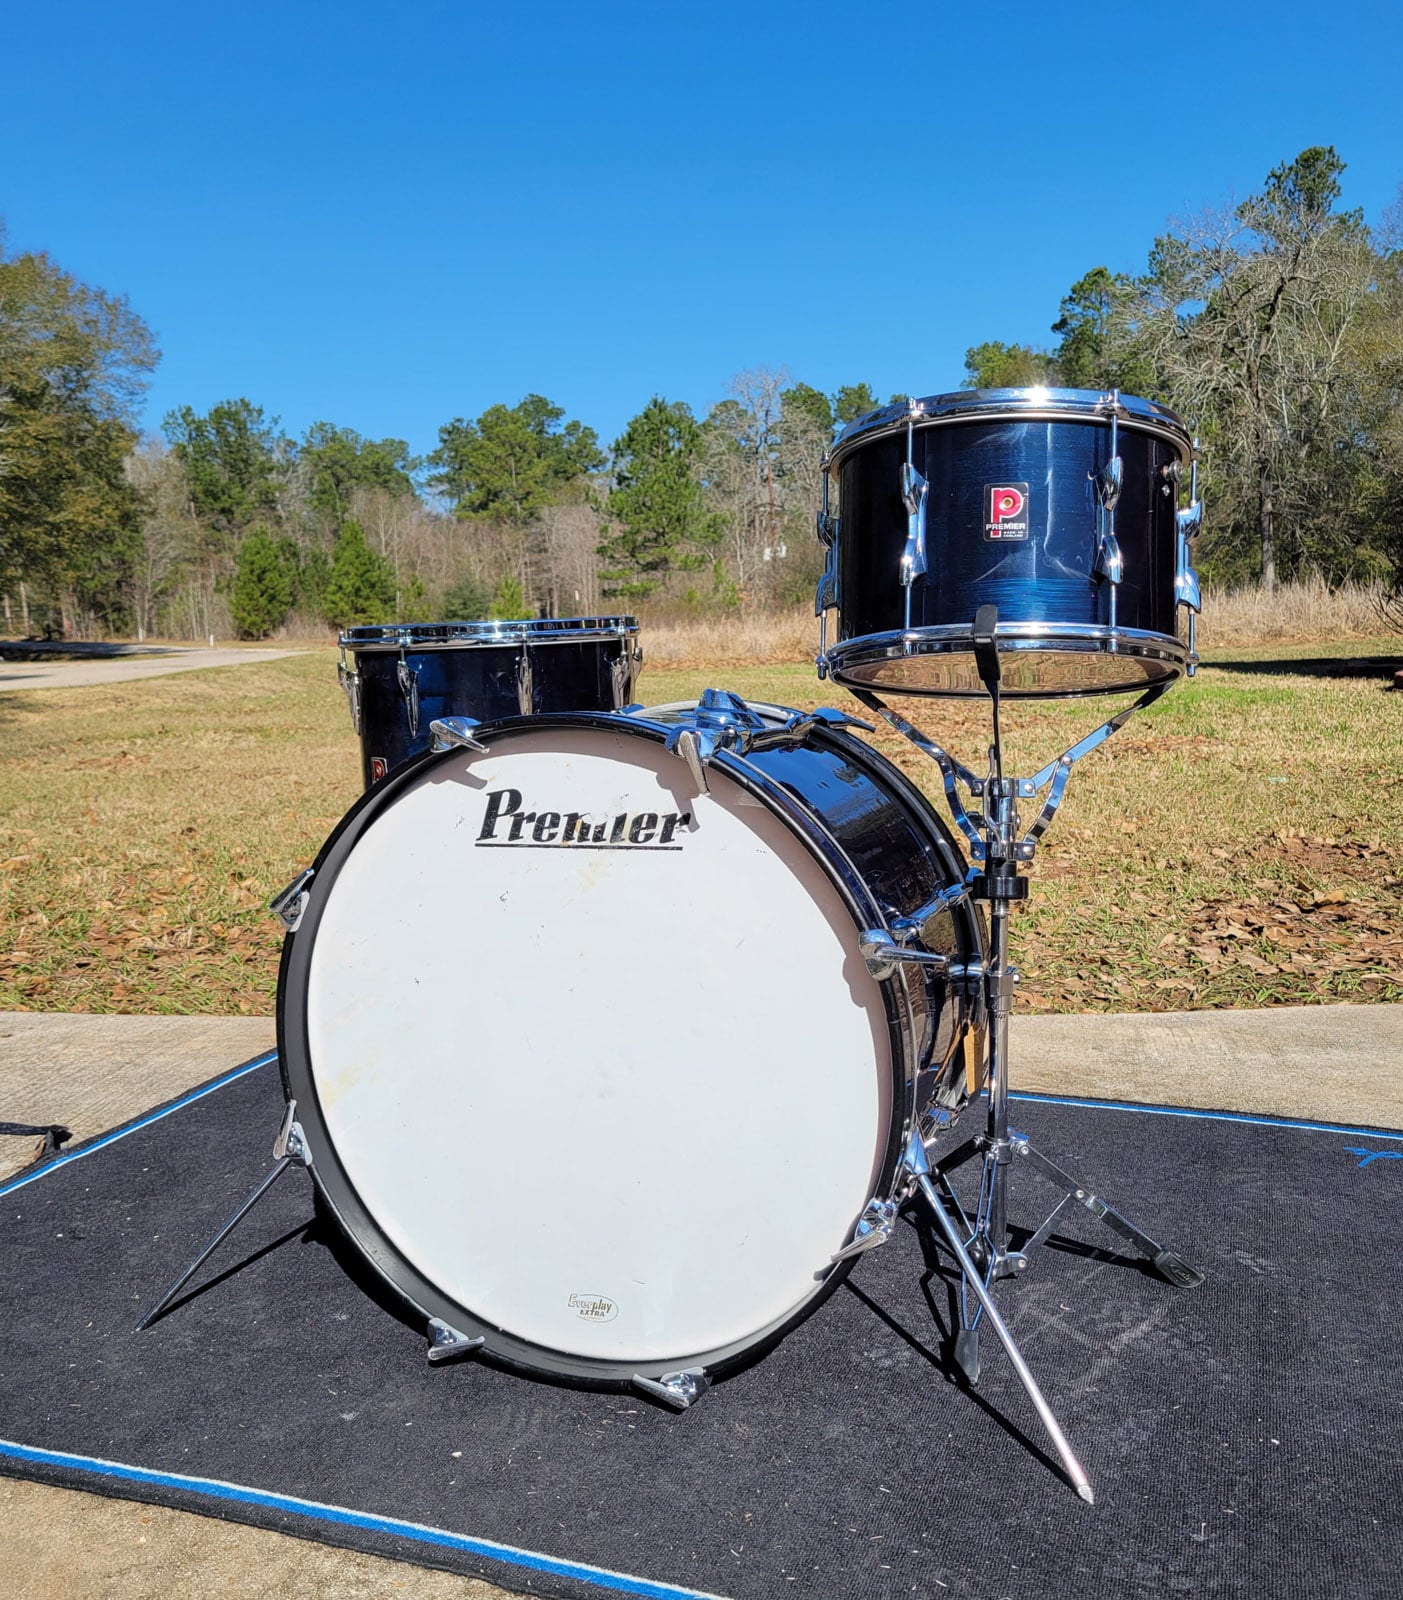 AP Drum Co - Sweet little three piece vintage drum set on a beautiful Texas day